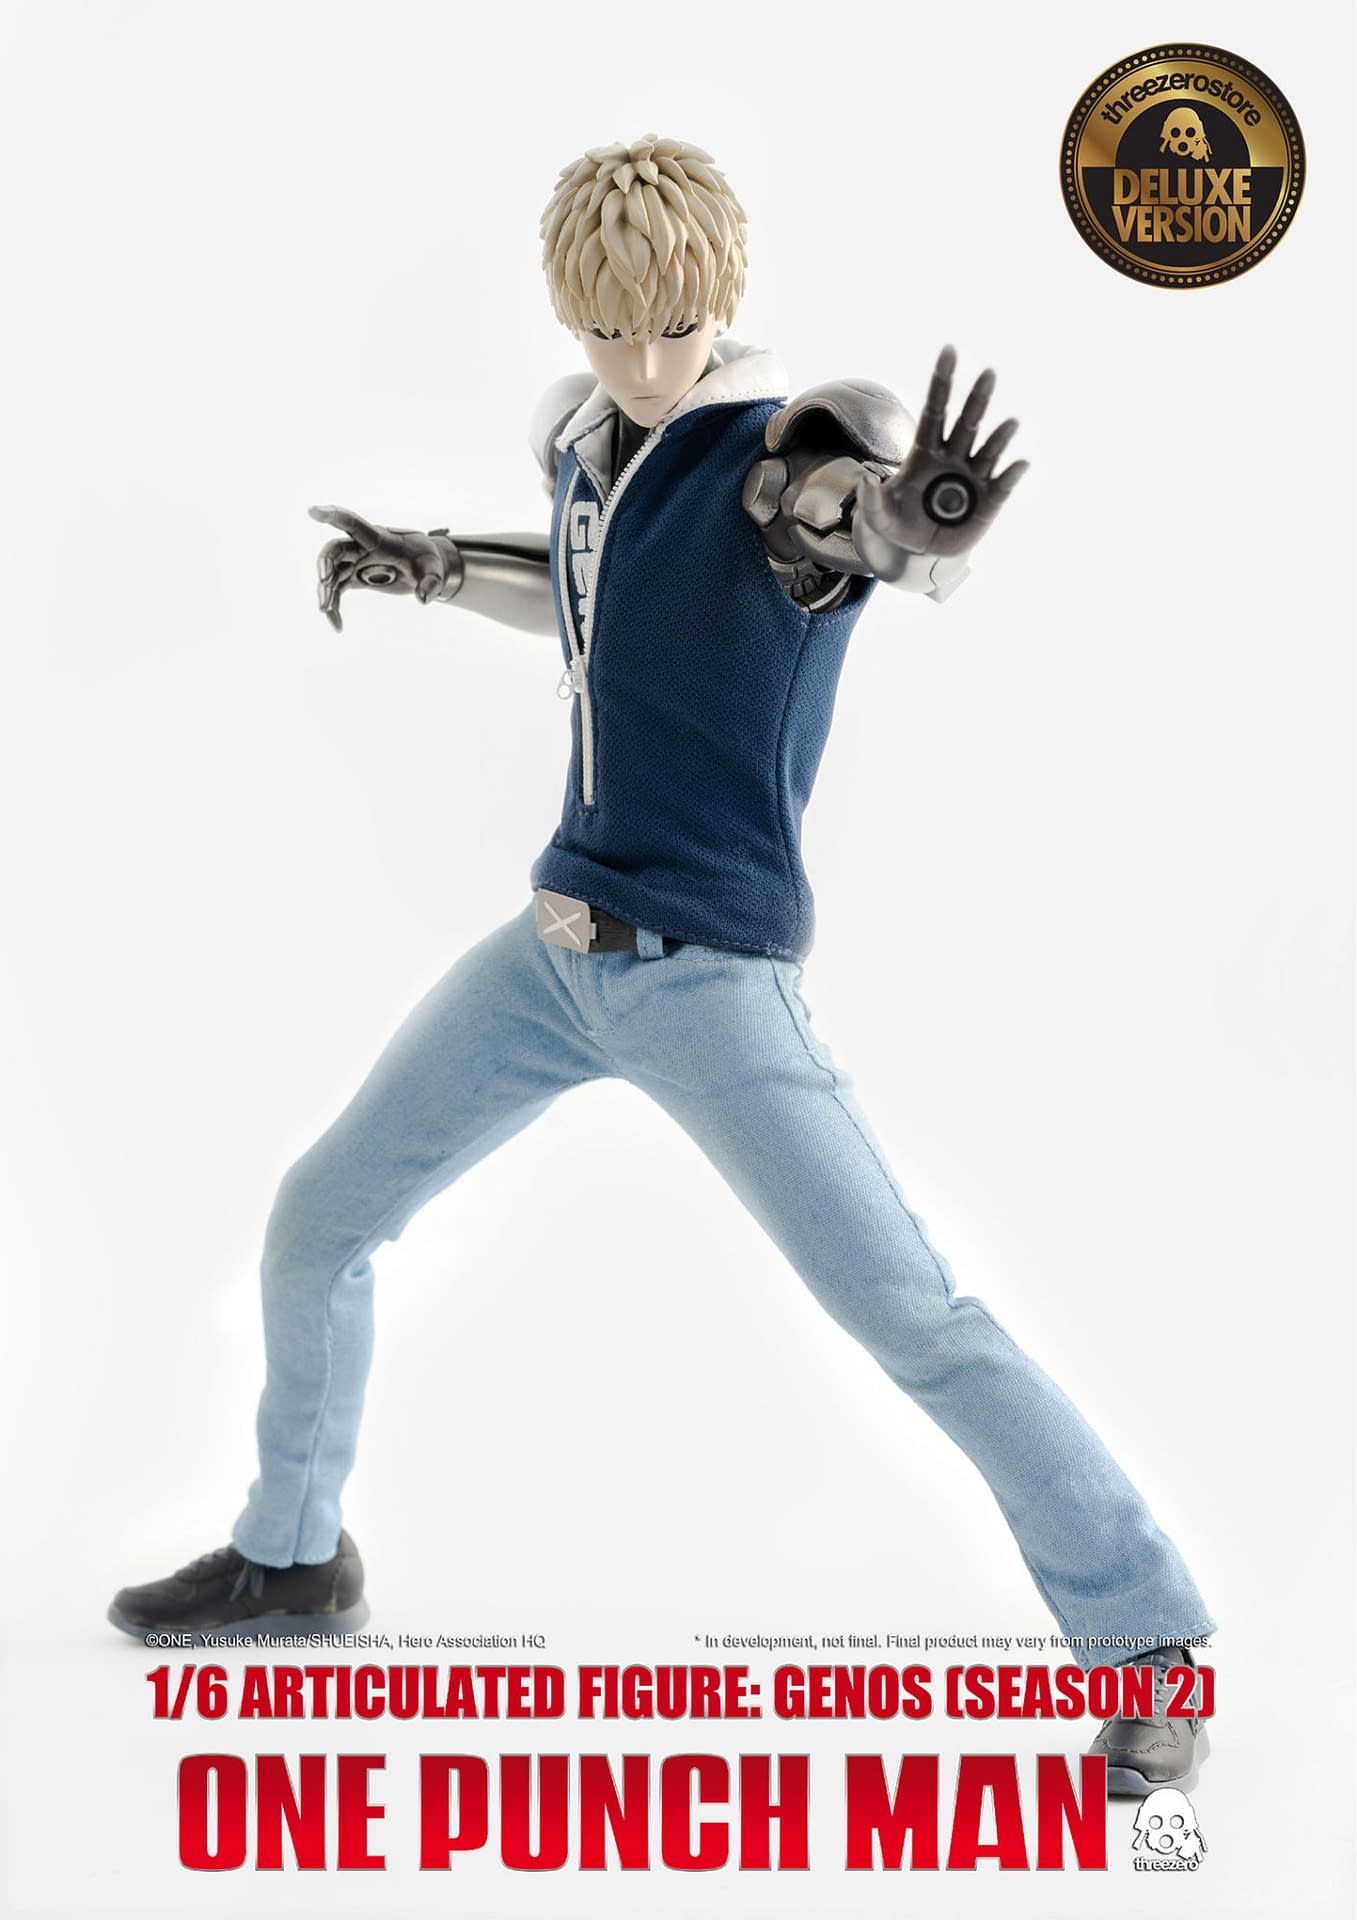 "One Punch Man" Genos Brings His A Game with Threezero